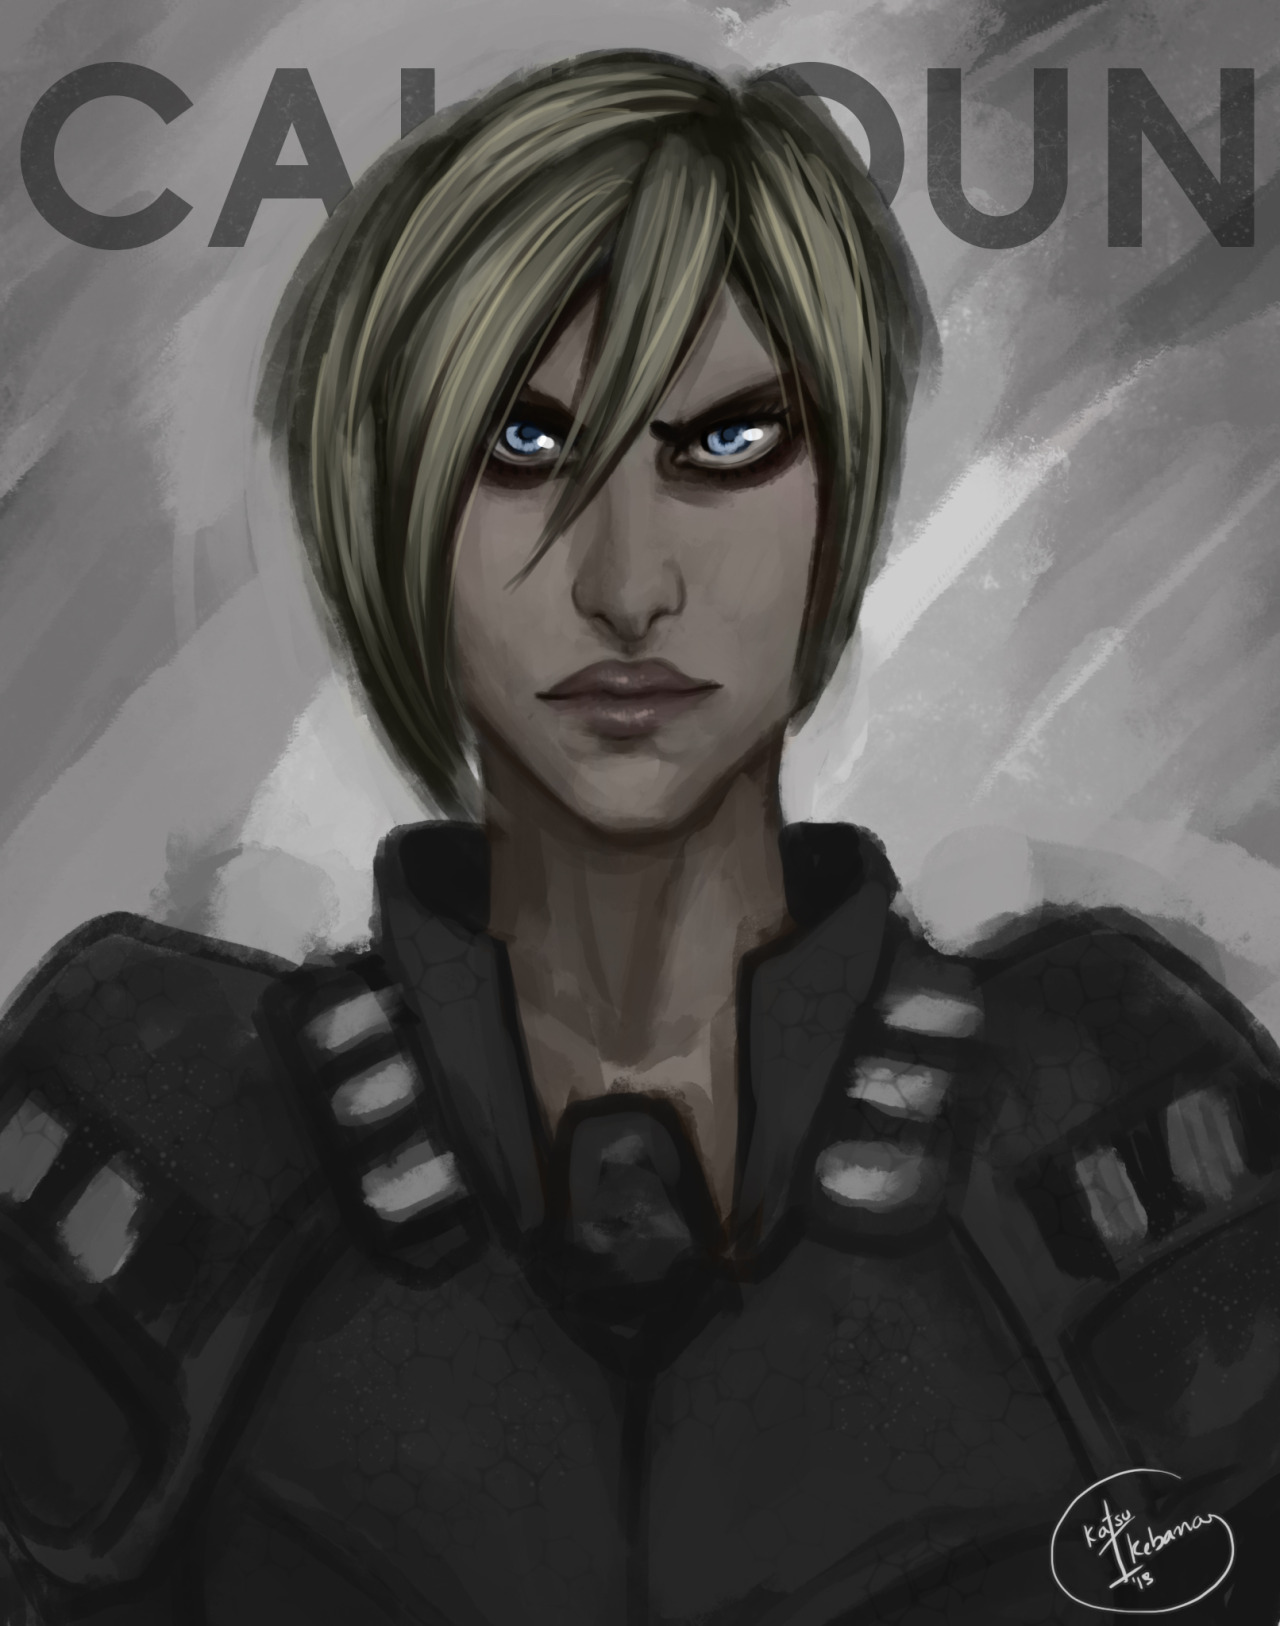 One of my crushes, Sergeant Calhoun from Wreck it Ralph *//////* Yesterday I watched